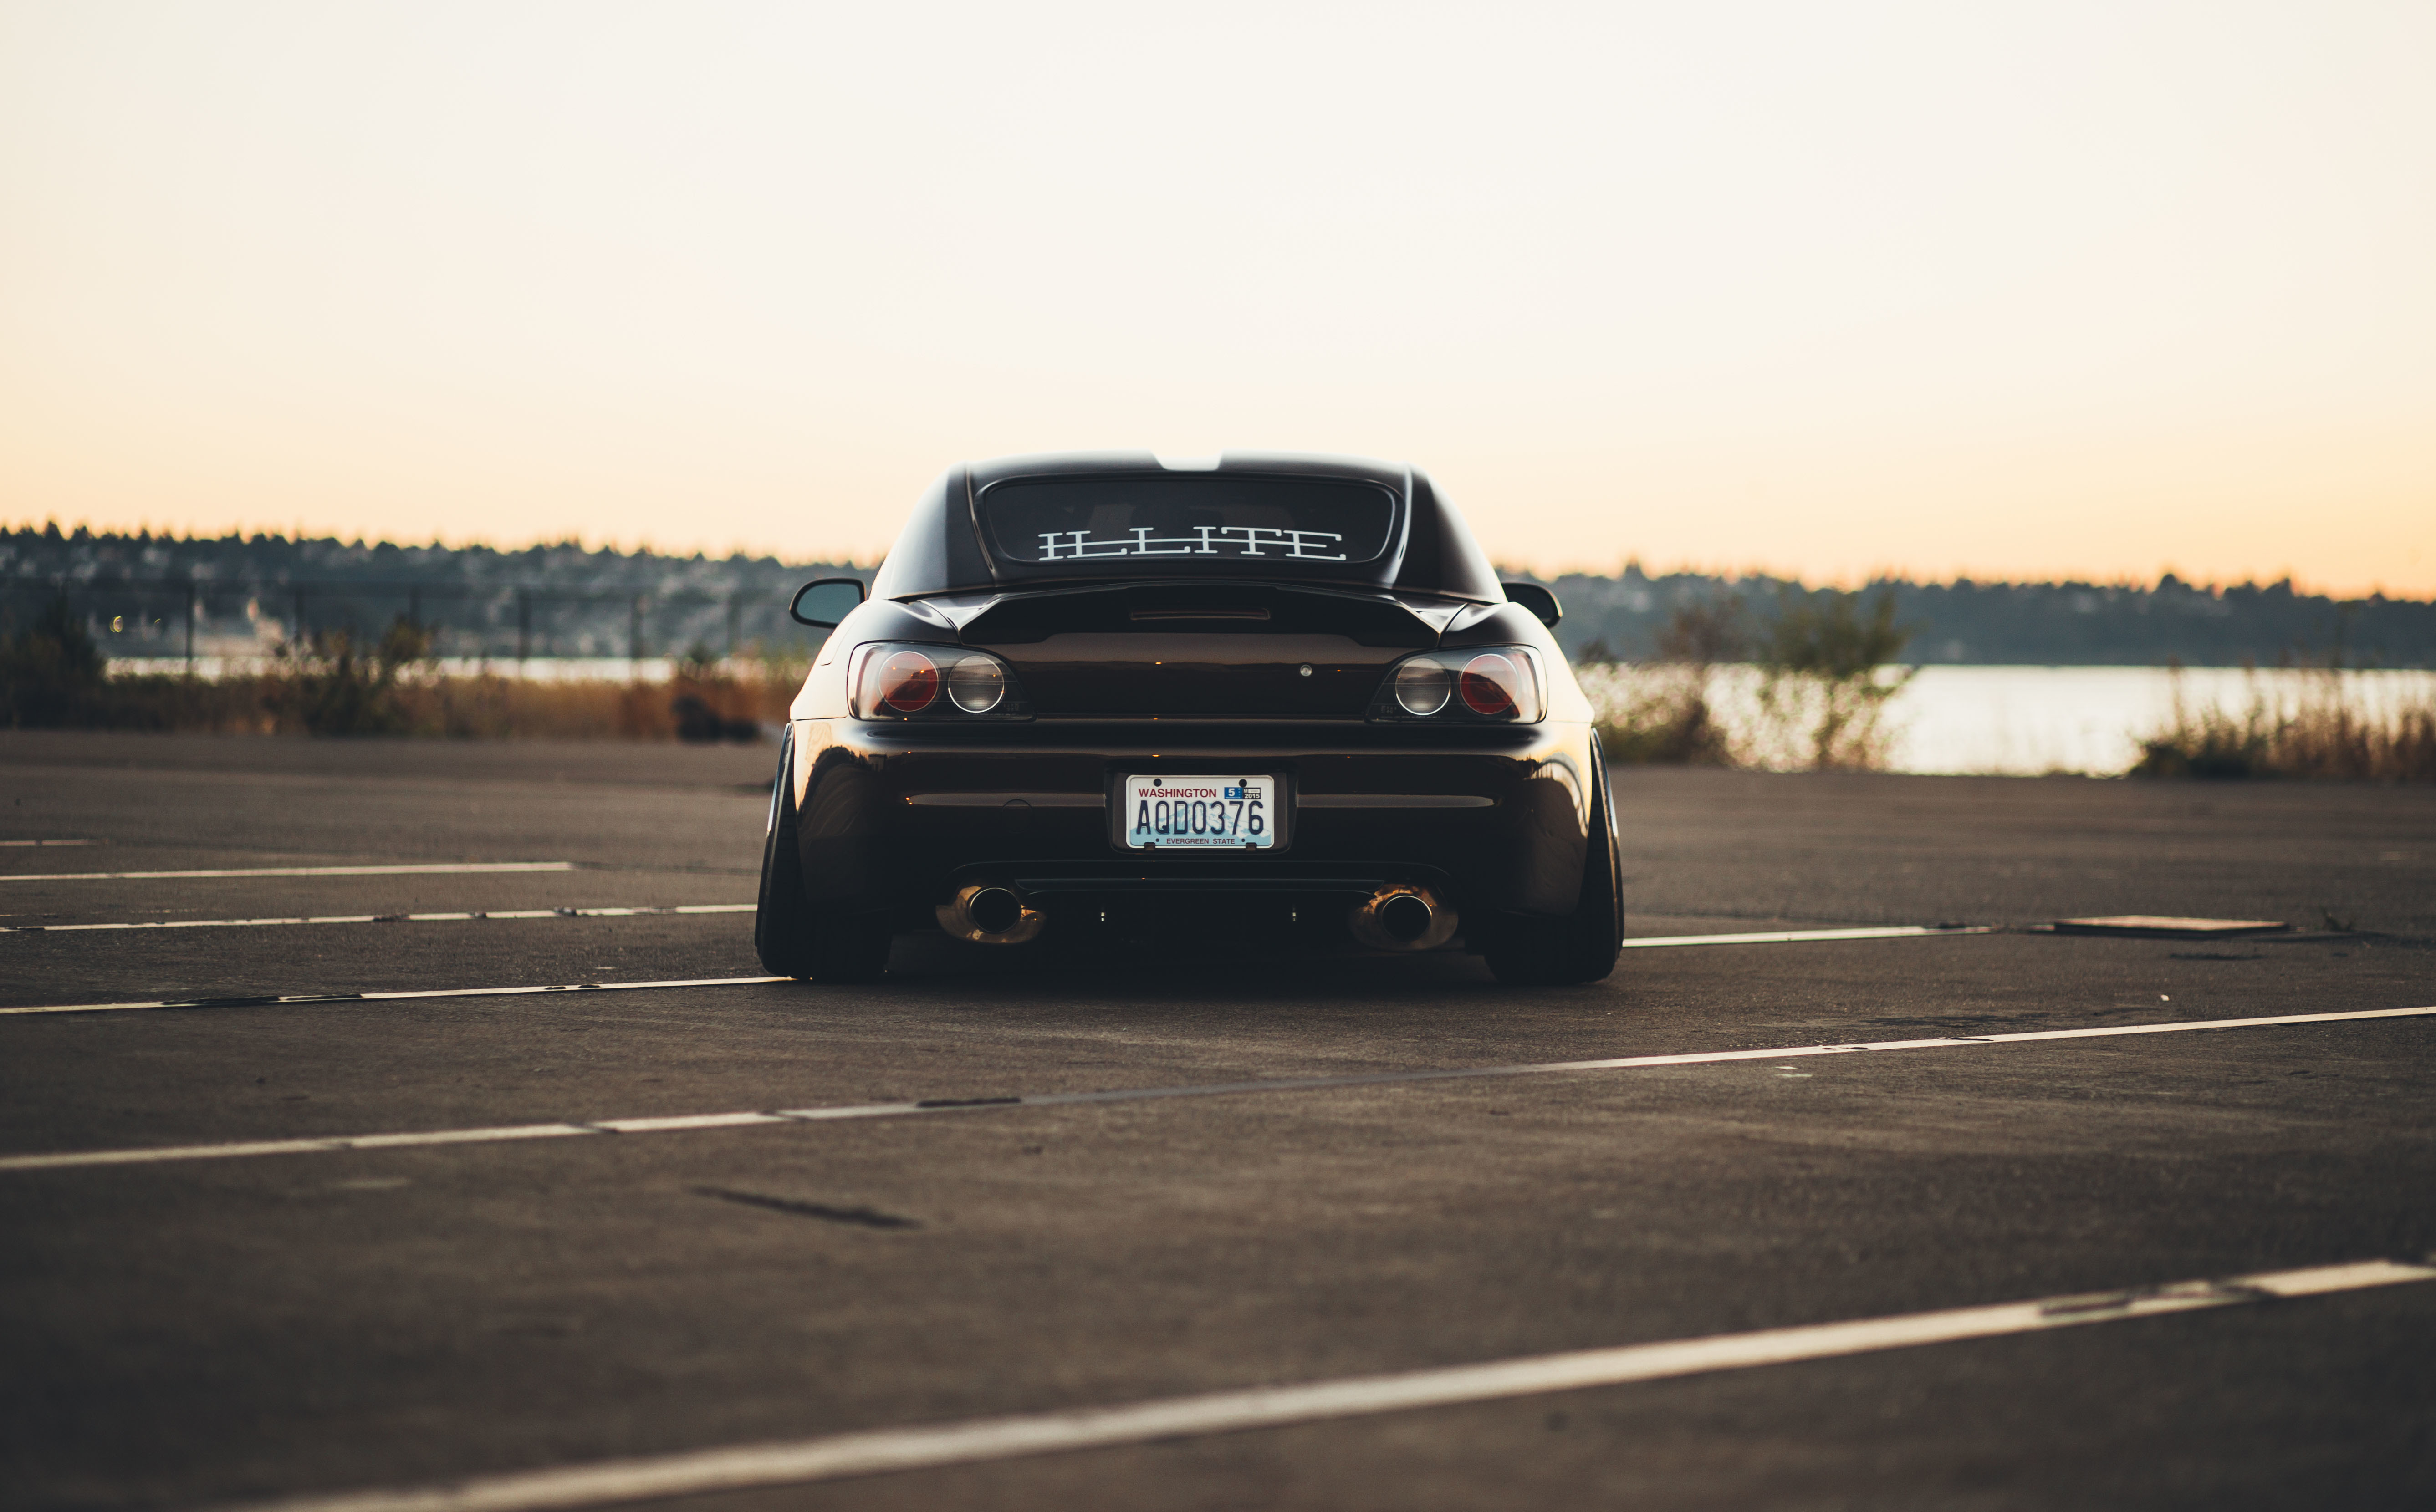 132025 download wallpaper honda, cars, black, back view, rear view, s2000 screensavers and pictures for free